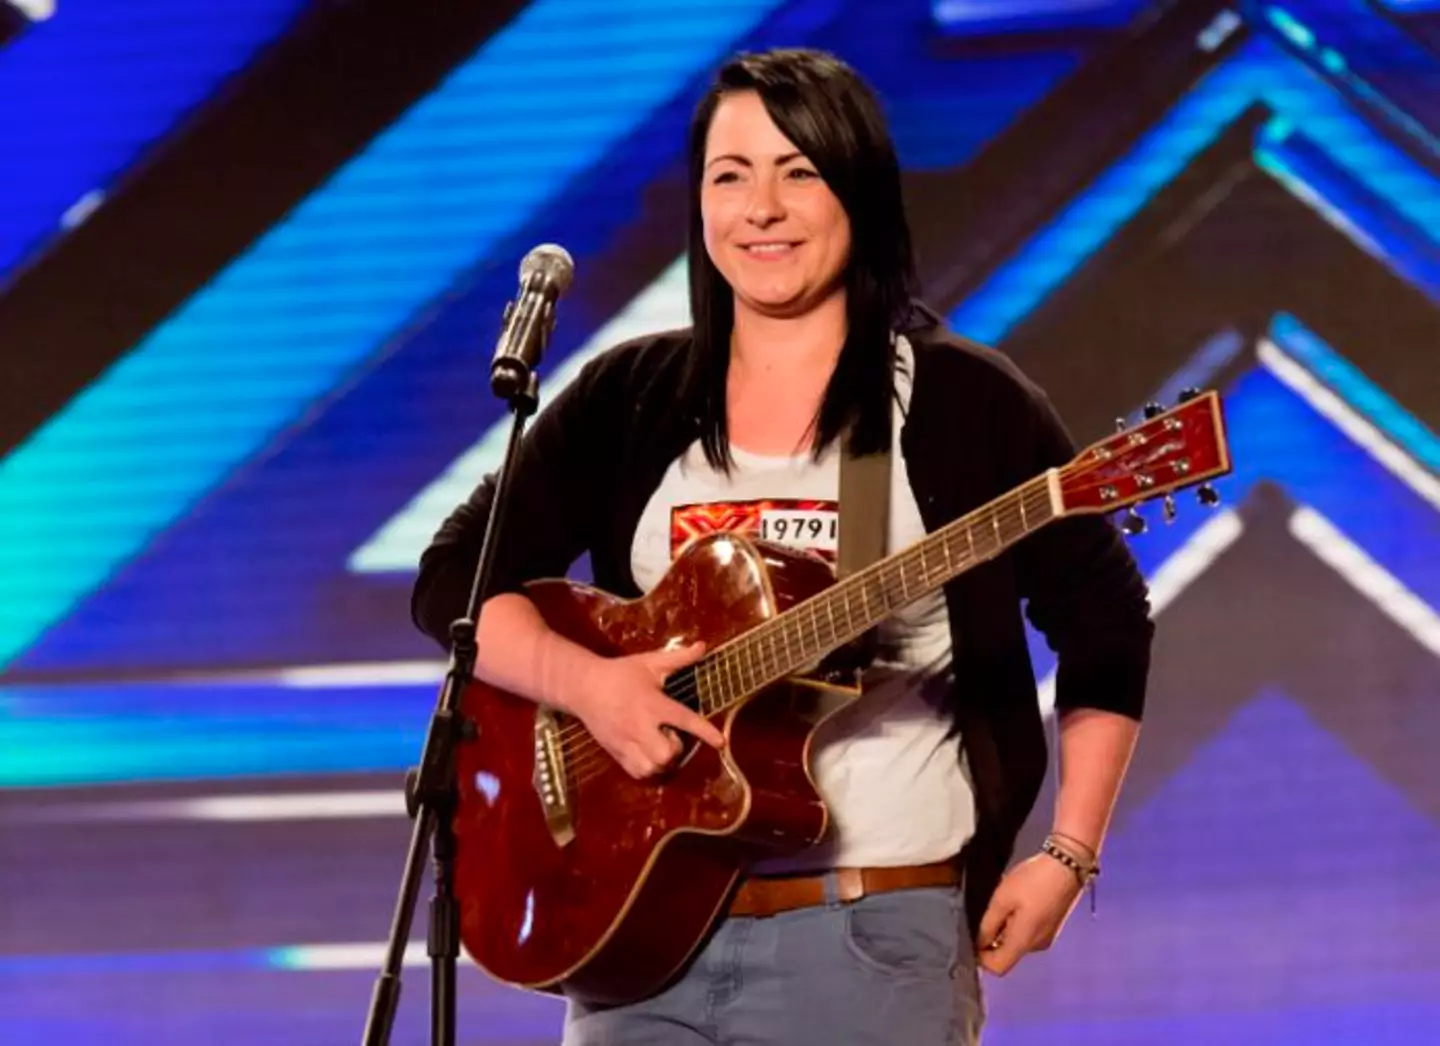 Lucy Spraggan appeared on the X Factor back in 2012.